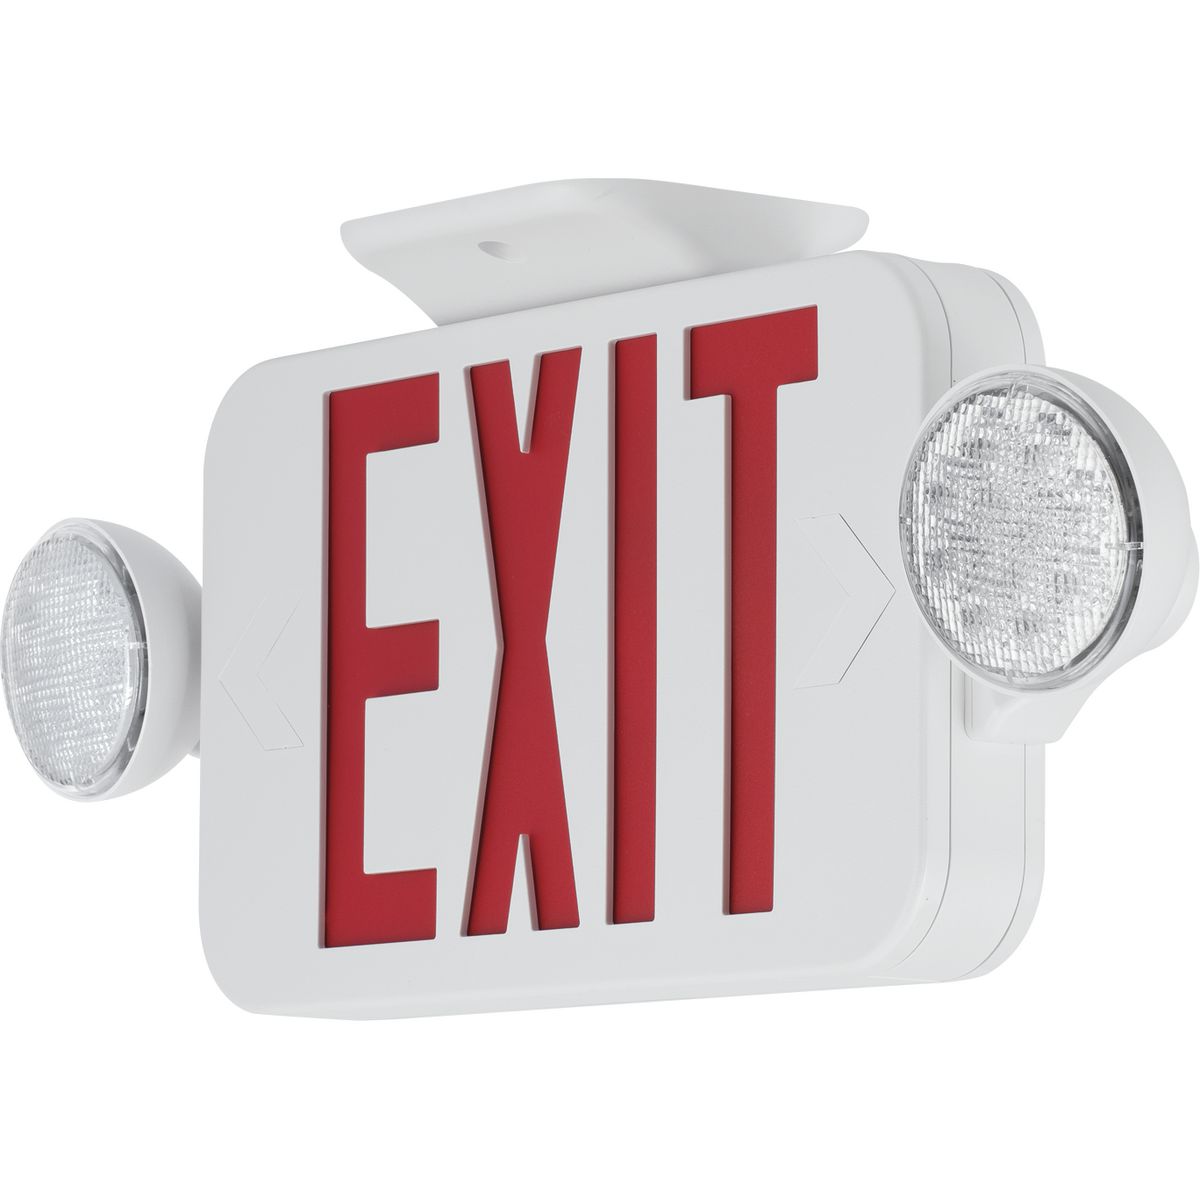 PECUE-UR-30 LED COMBO EXIT/EMERGENCY RED